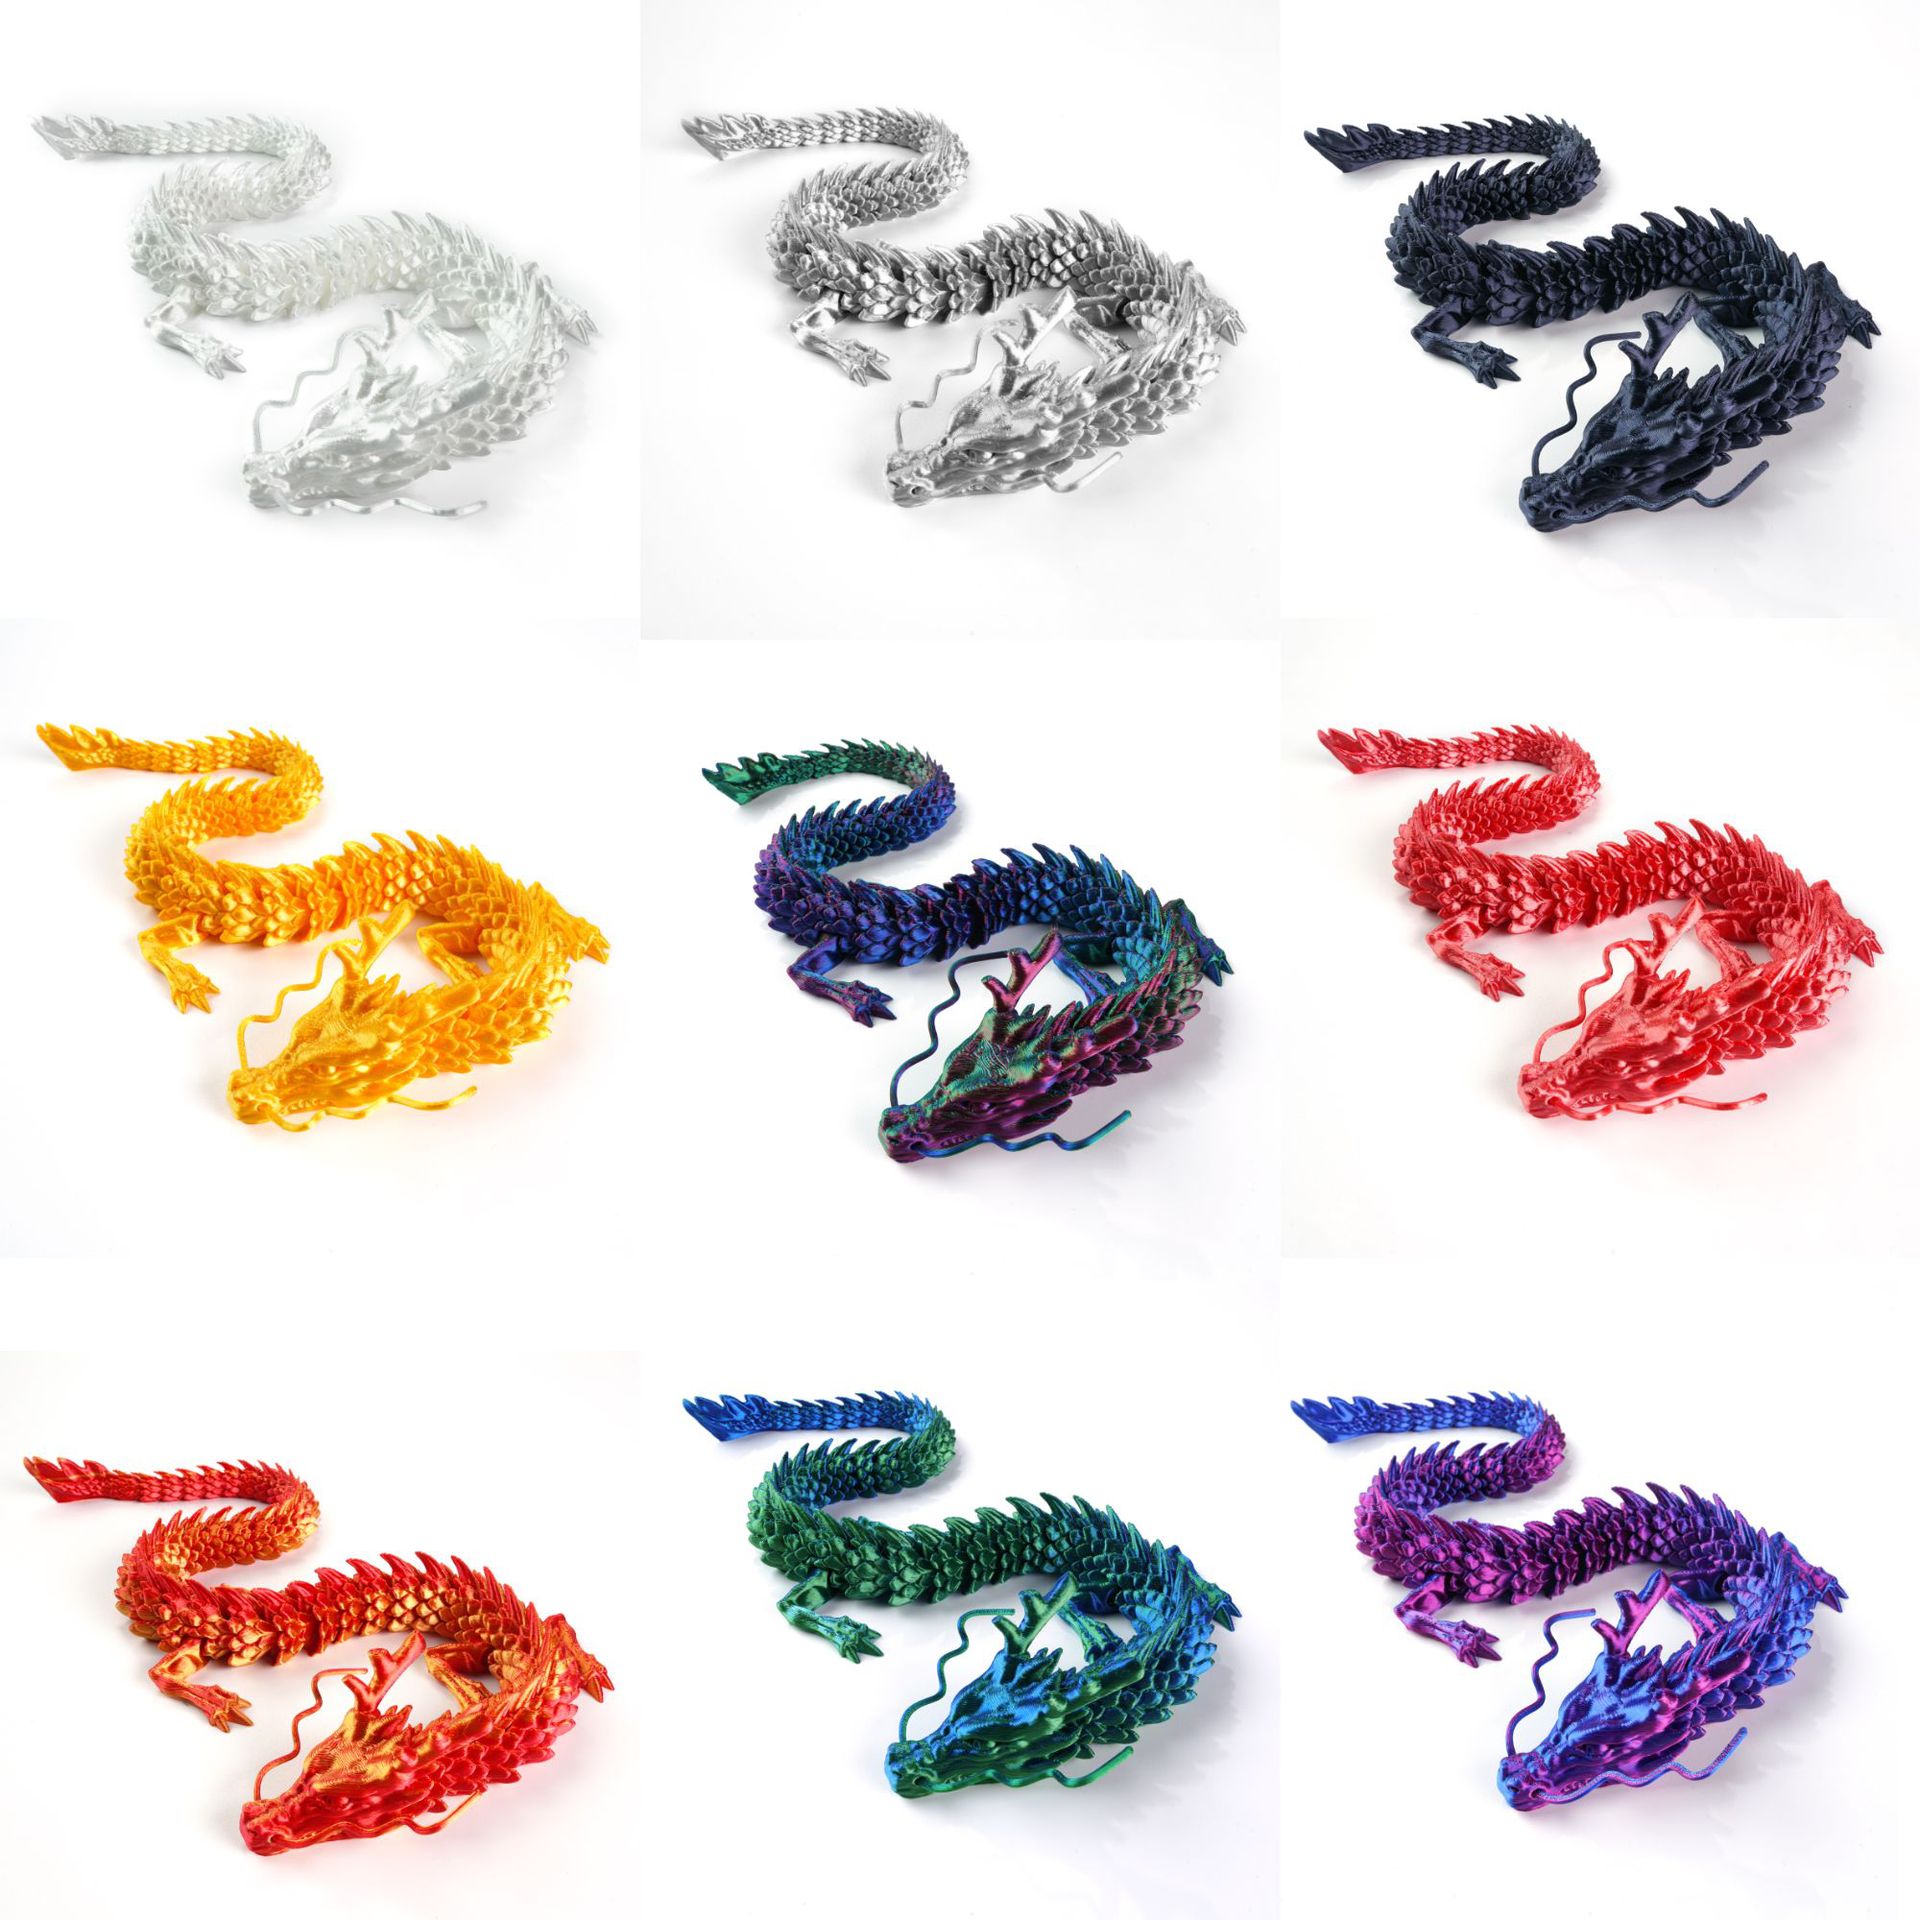 3D Printing Chinese Dragon Dragon Beast Big Fish Crafts Decoration Gift Trending Creative Decoration Factory Hand Office